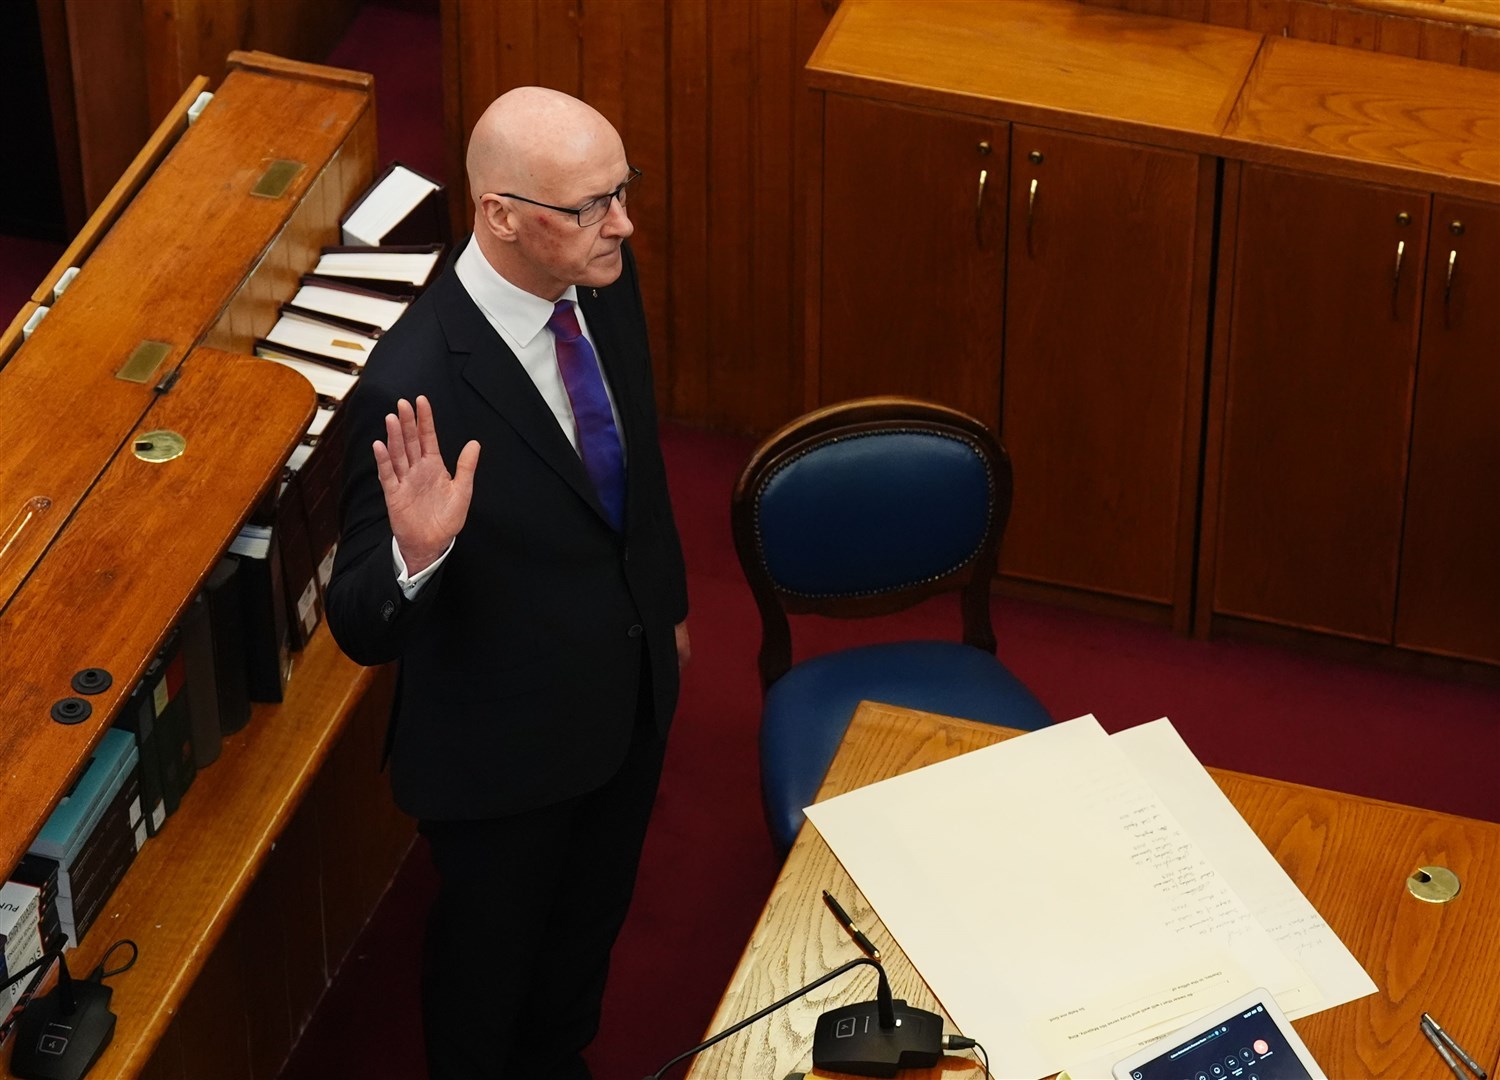 John Swinney took the oath as he was sworn in as First Minister of Scotland and Keeper of the Scottish Seal, at the Court of Session in Edinburgh (Andrew Milligan/PA)